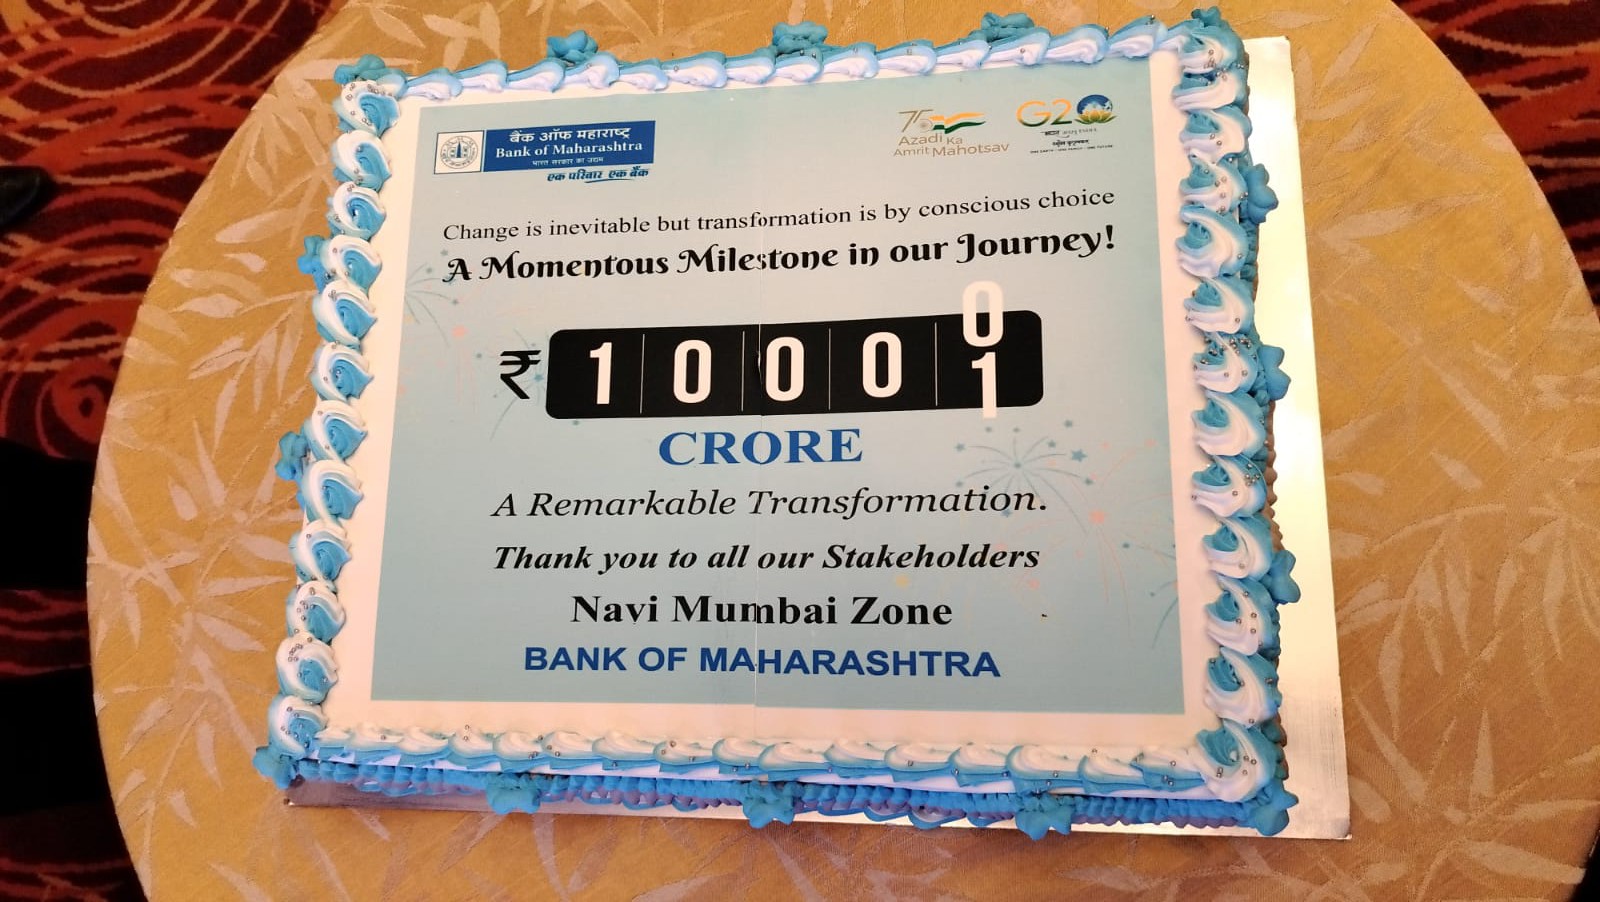 Bank of Maharashtra Customer Connect and Outreach program receives overwhelming response